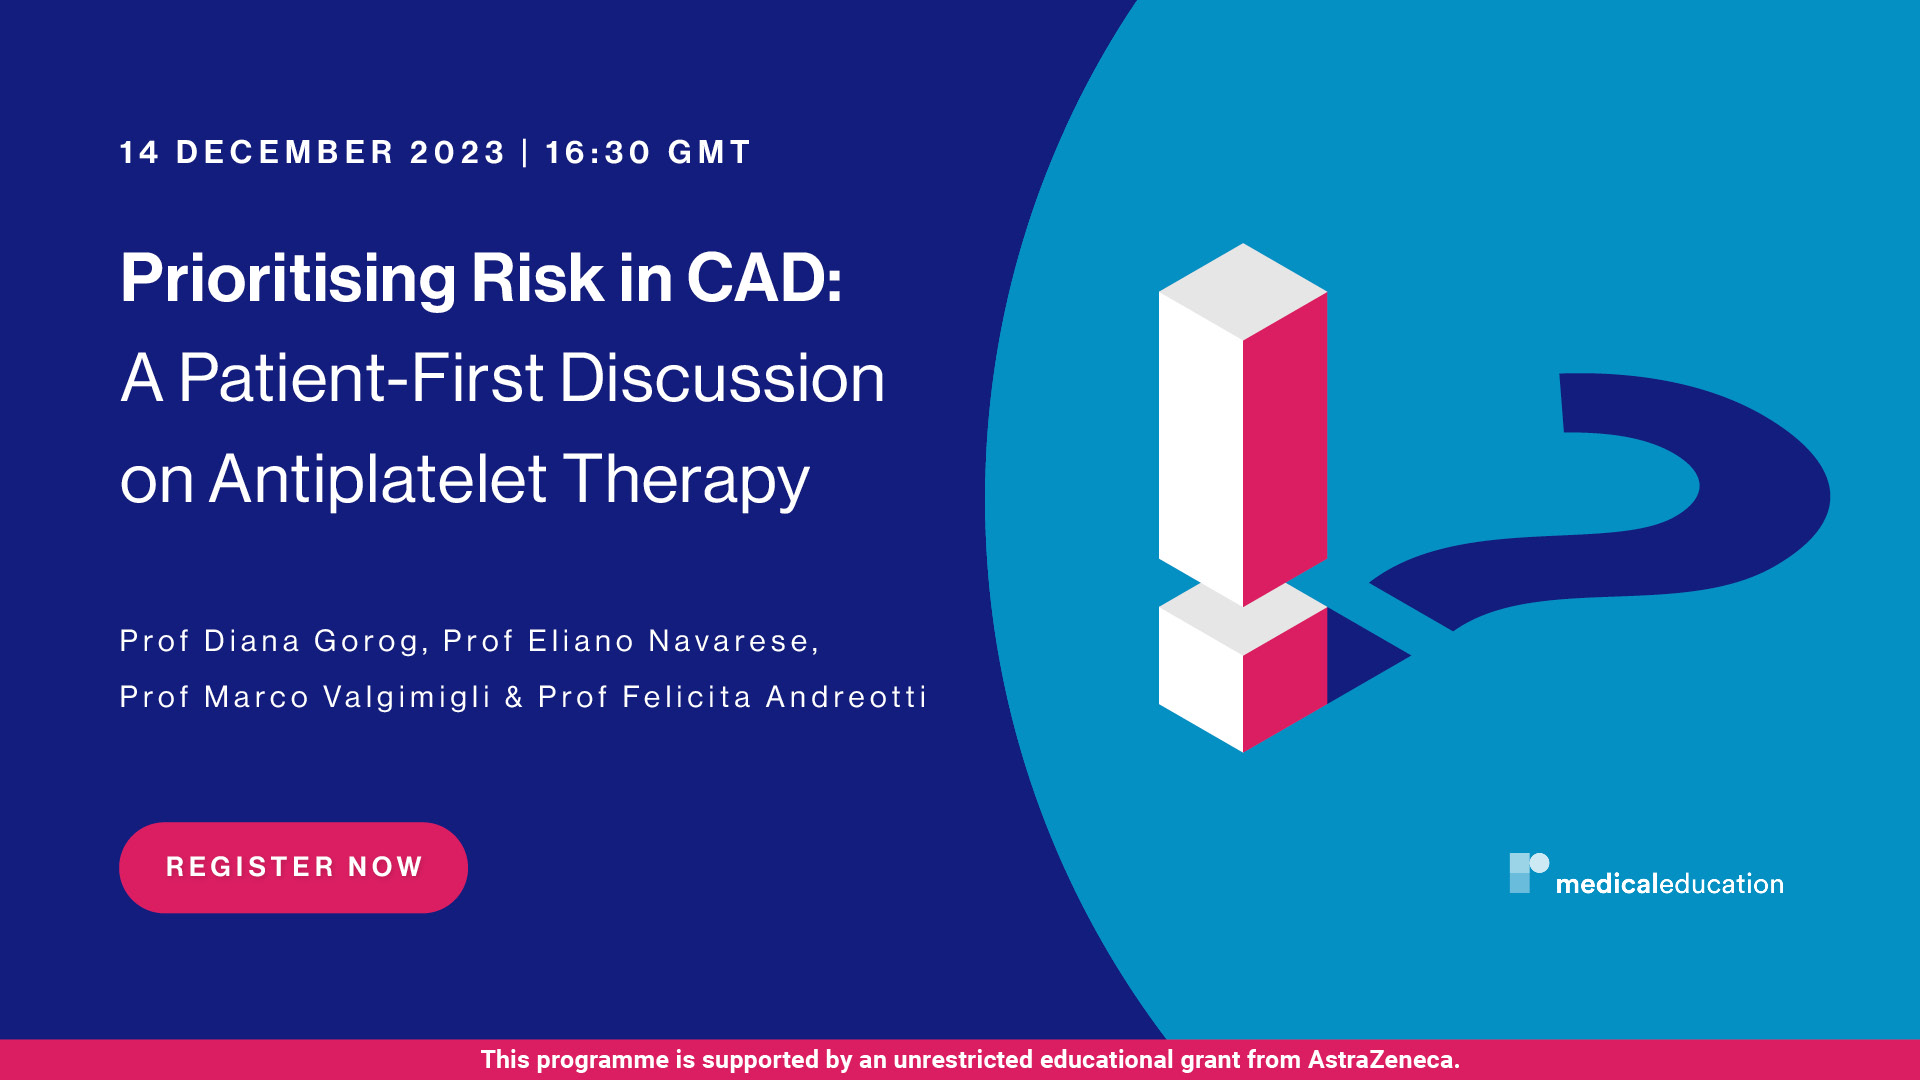 Prioritising Risk in CAD: A Patient-First Discussion on Antiplatelet Therapy